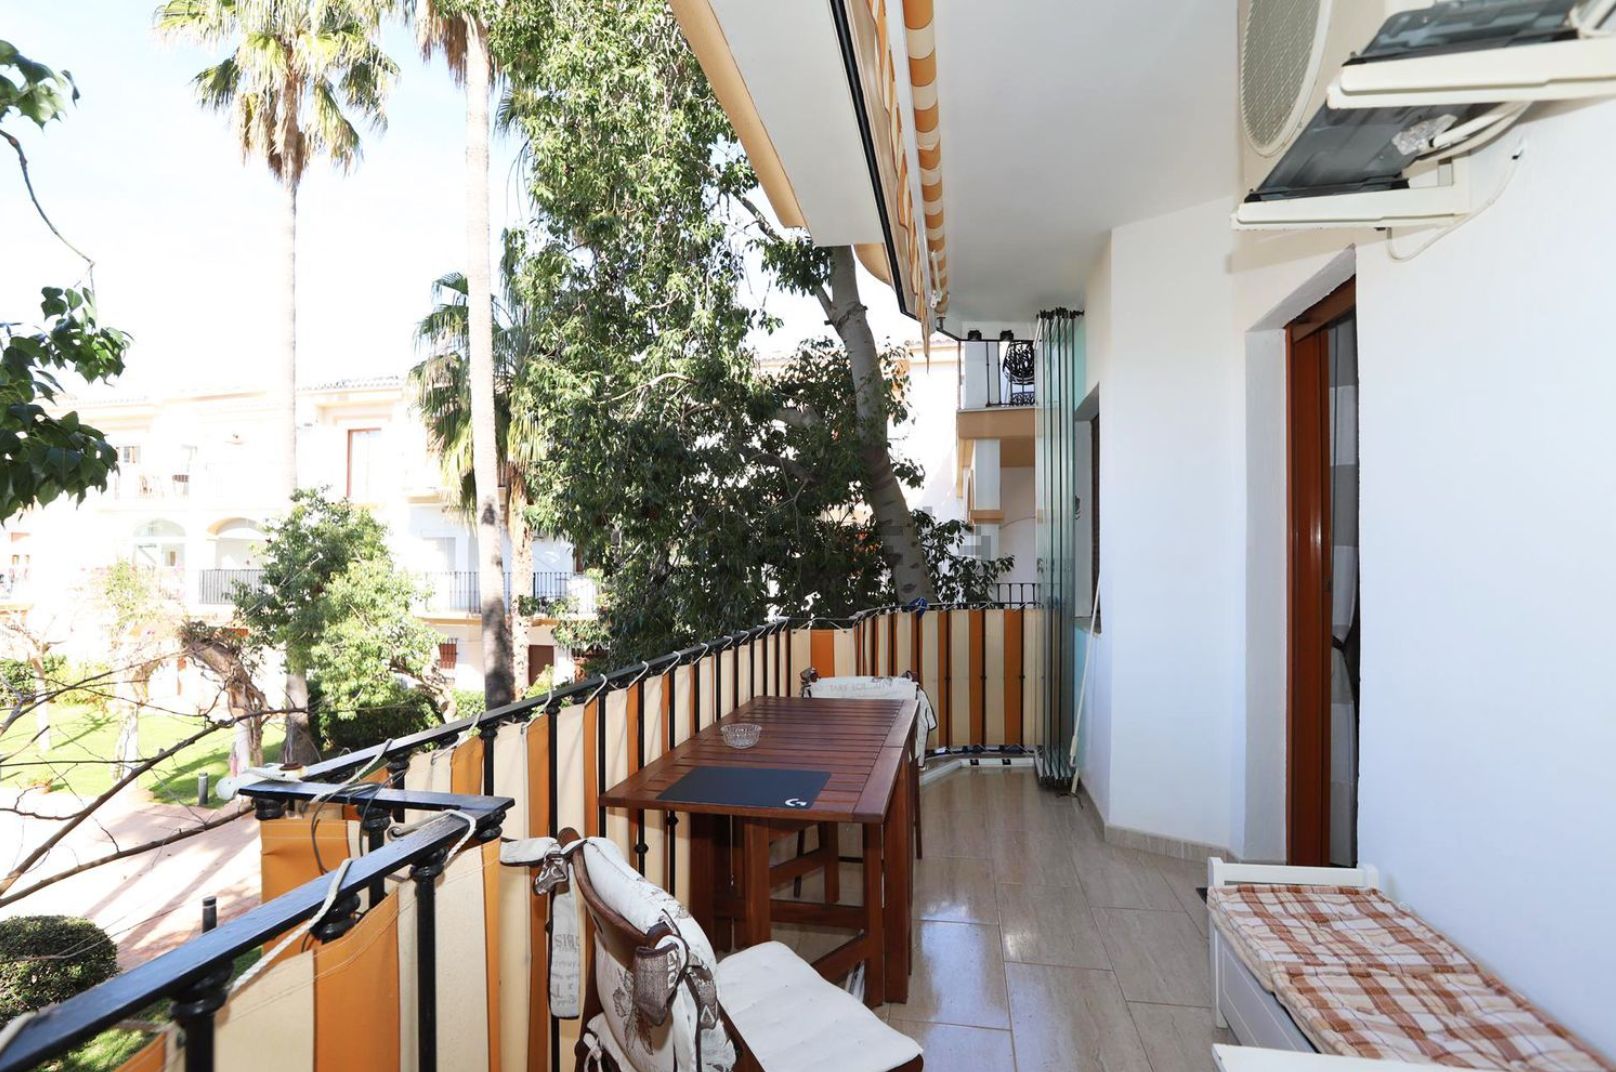 Apartment for sale a stone's throw from the beach